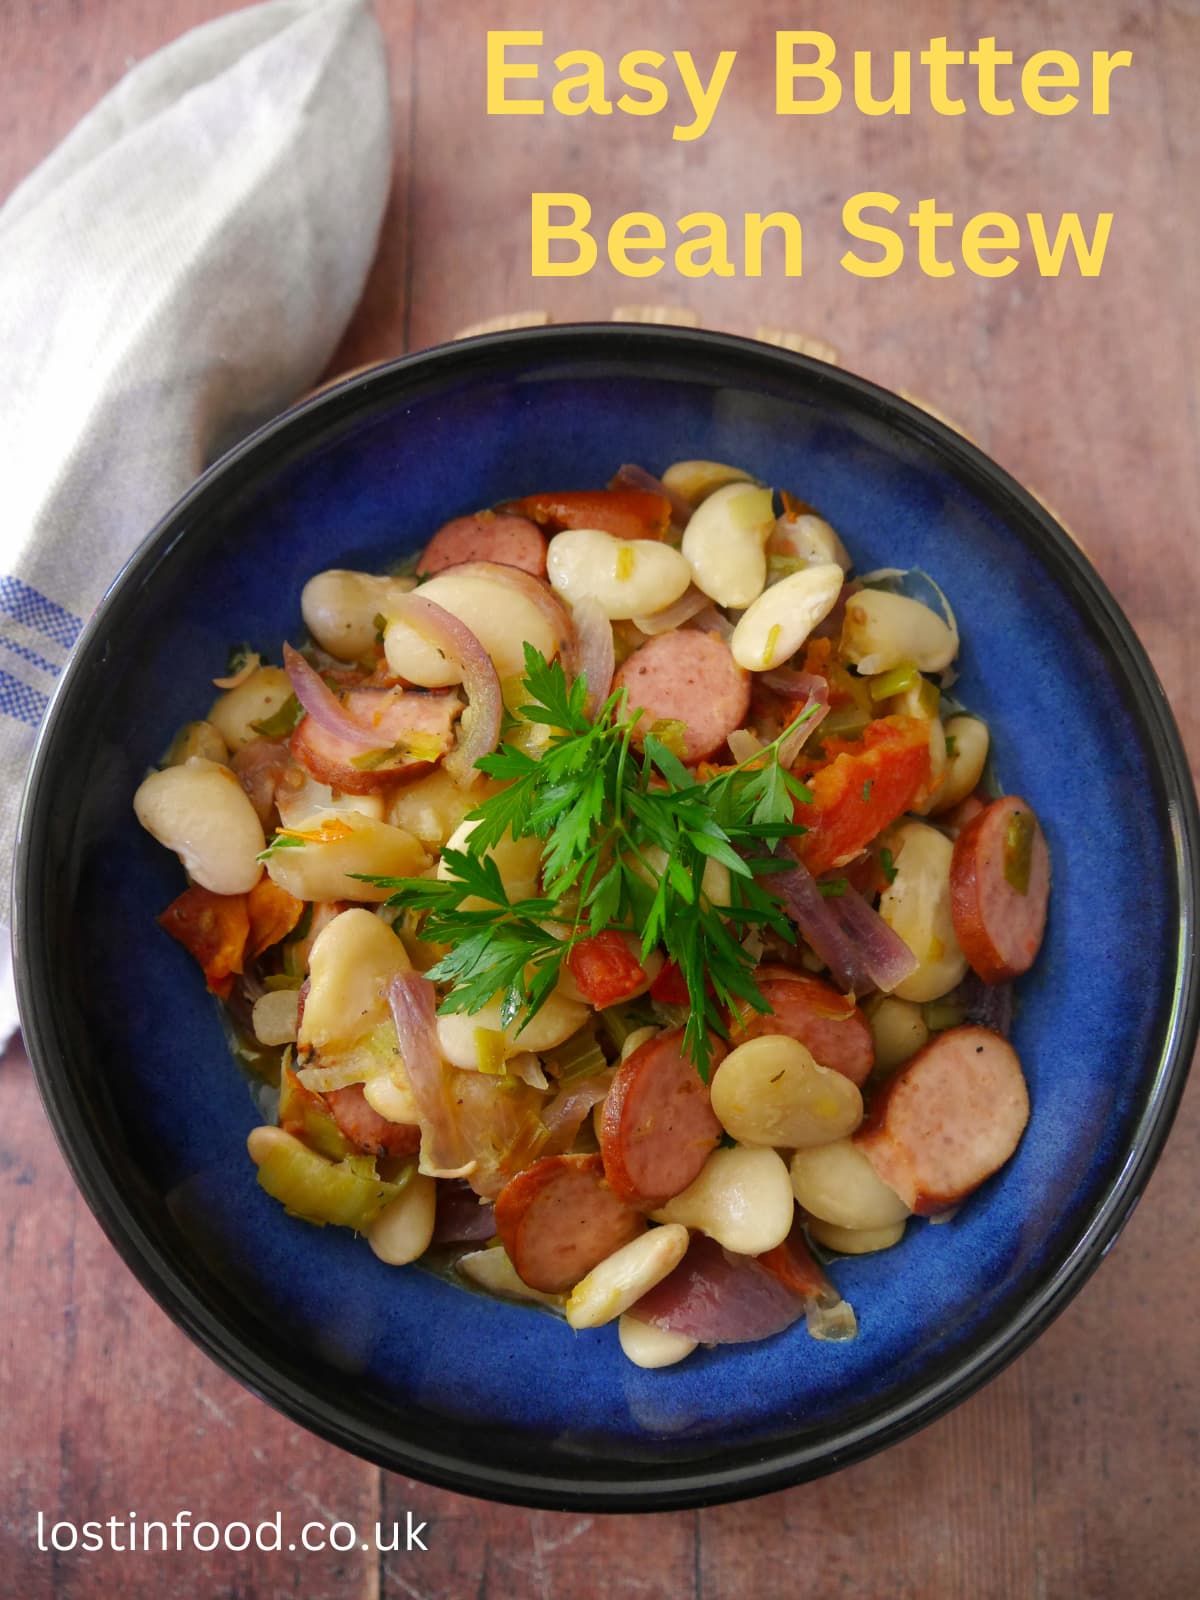 Pinnable image with recipe title and blue bowl filled with butter bean and smoked sausage stew with a garnish of fresh parsley.